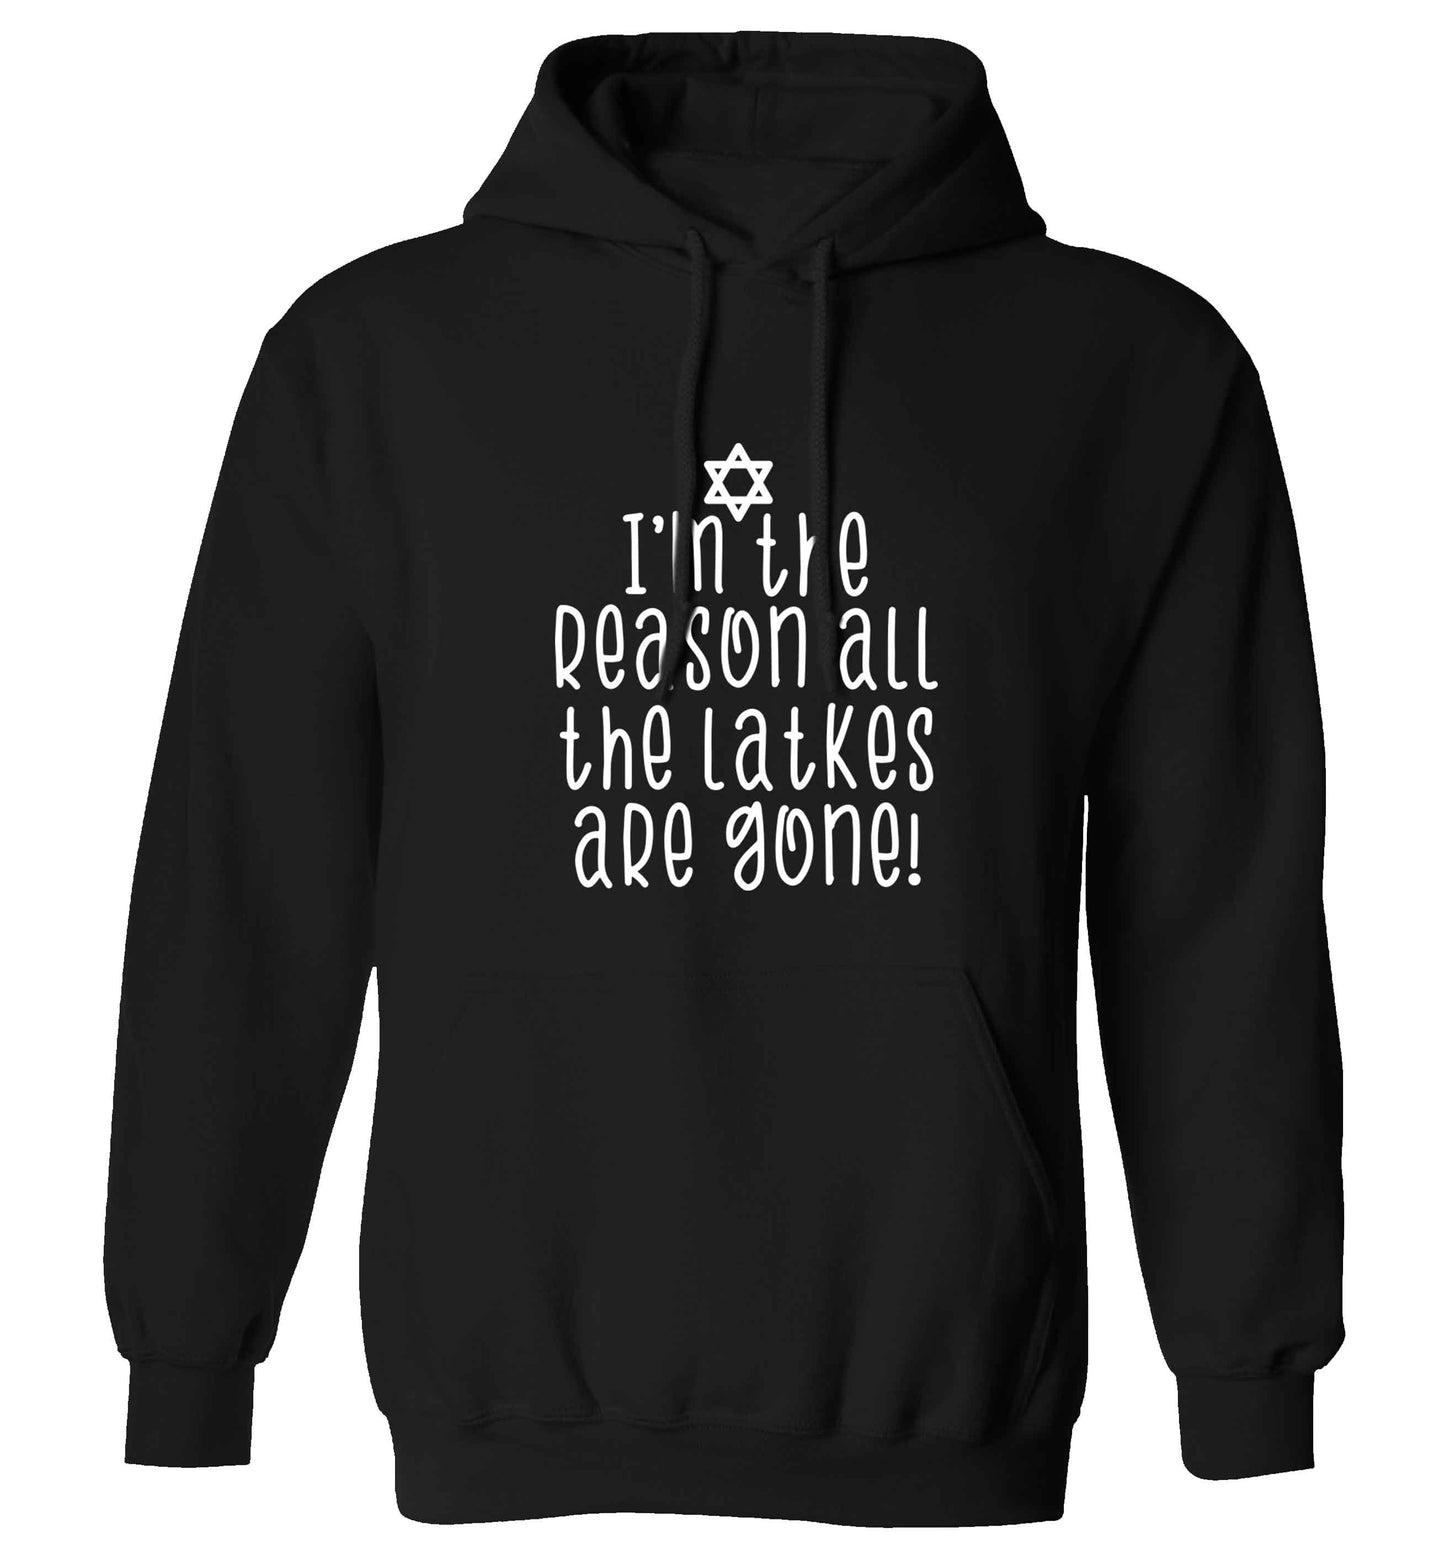 I'm the reason all the latkes are gone adults unisex black hoodie 2XL